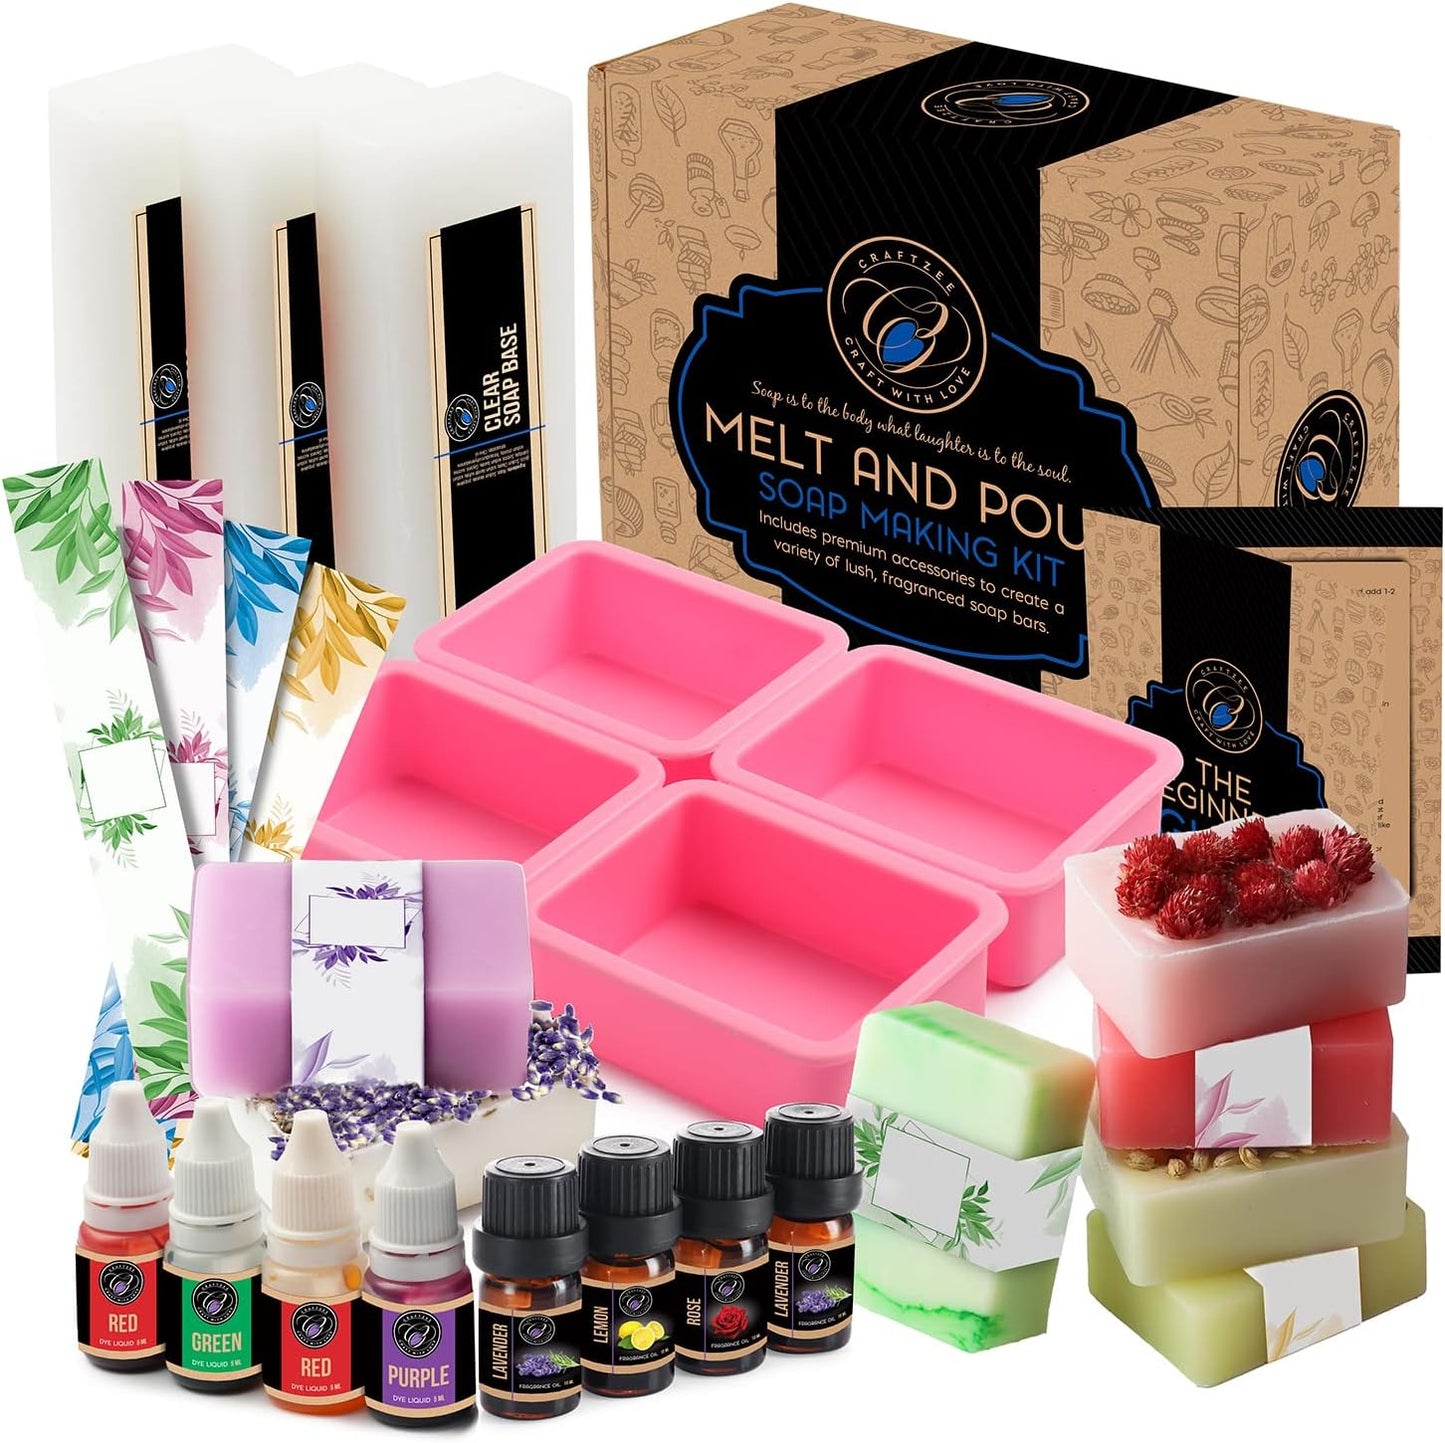 Melt and Pour Soap Making Kit with Glycerin Soap Base, Fragrance Oils, Liquid Dyes, Silicone Molds, Wrappers & Instruction Manual